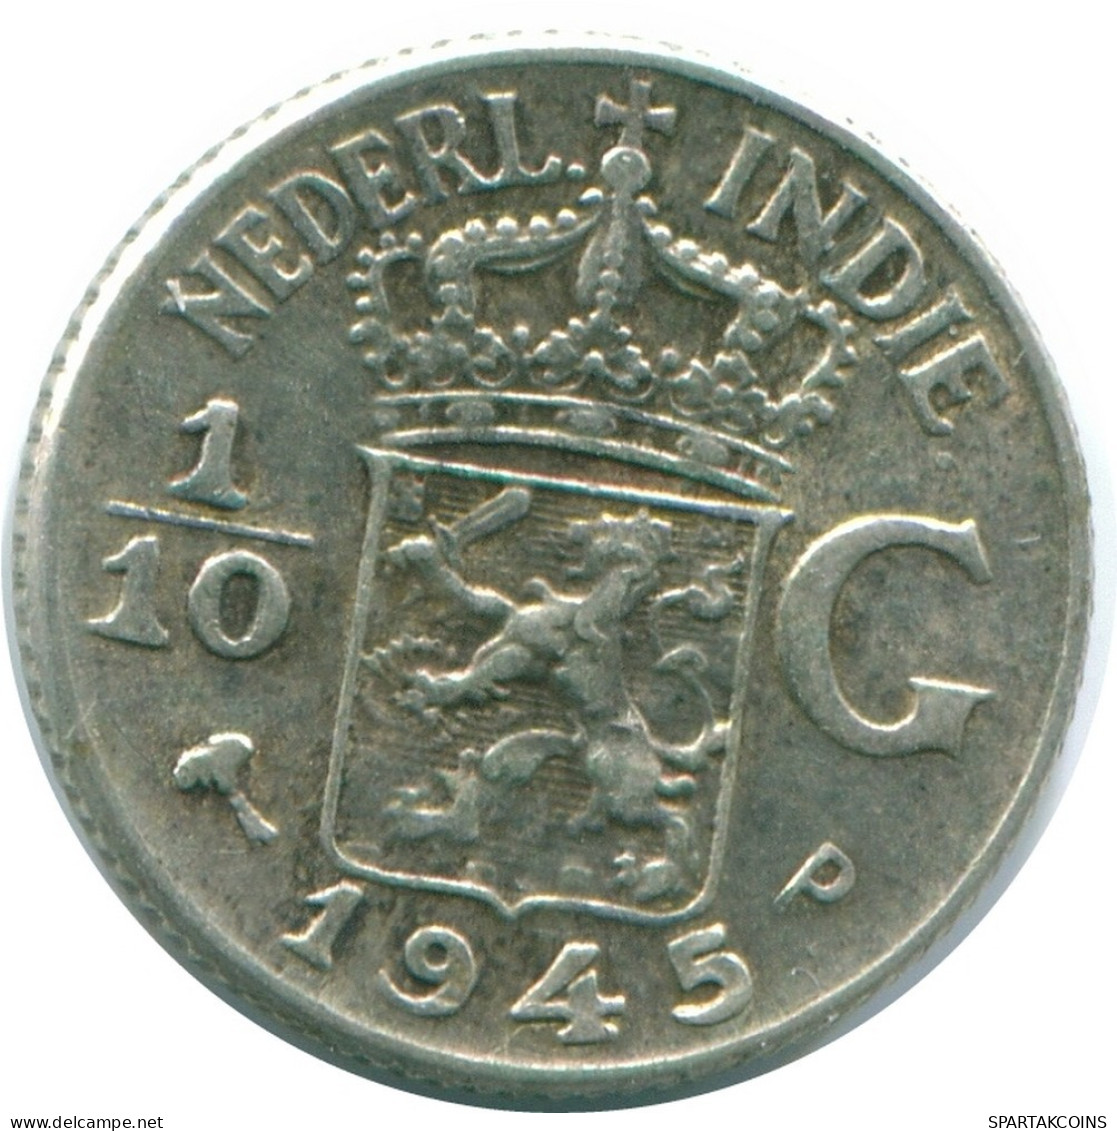 1/10 GULDEN 1945 P NETHERLANDS EAST INDIES SILVER Colonial Coin #NL14224.3.U.A - Indes Neerlandesas